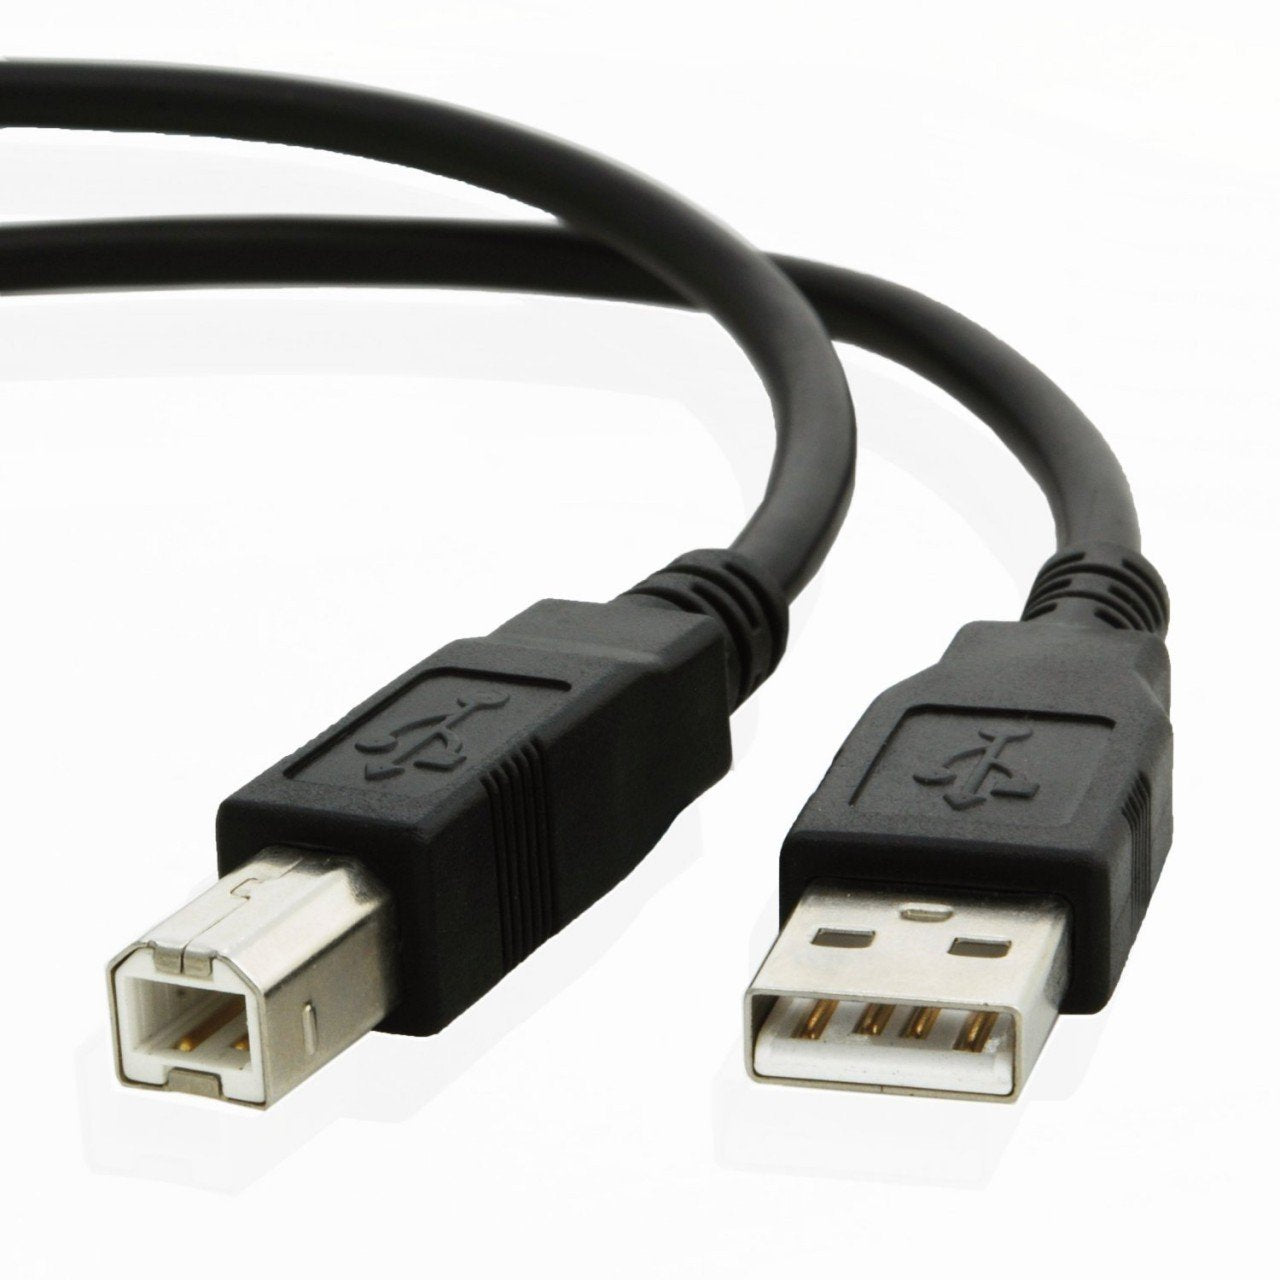 USB cable for Hp LASERJET PRO M402dn